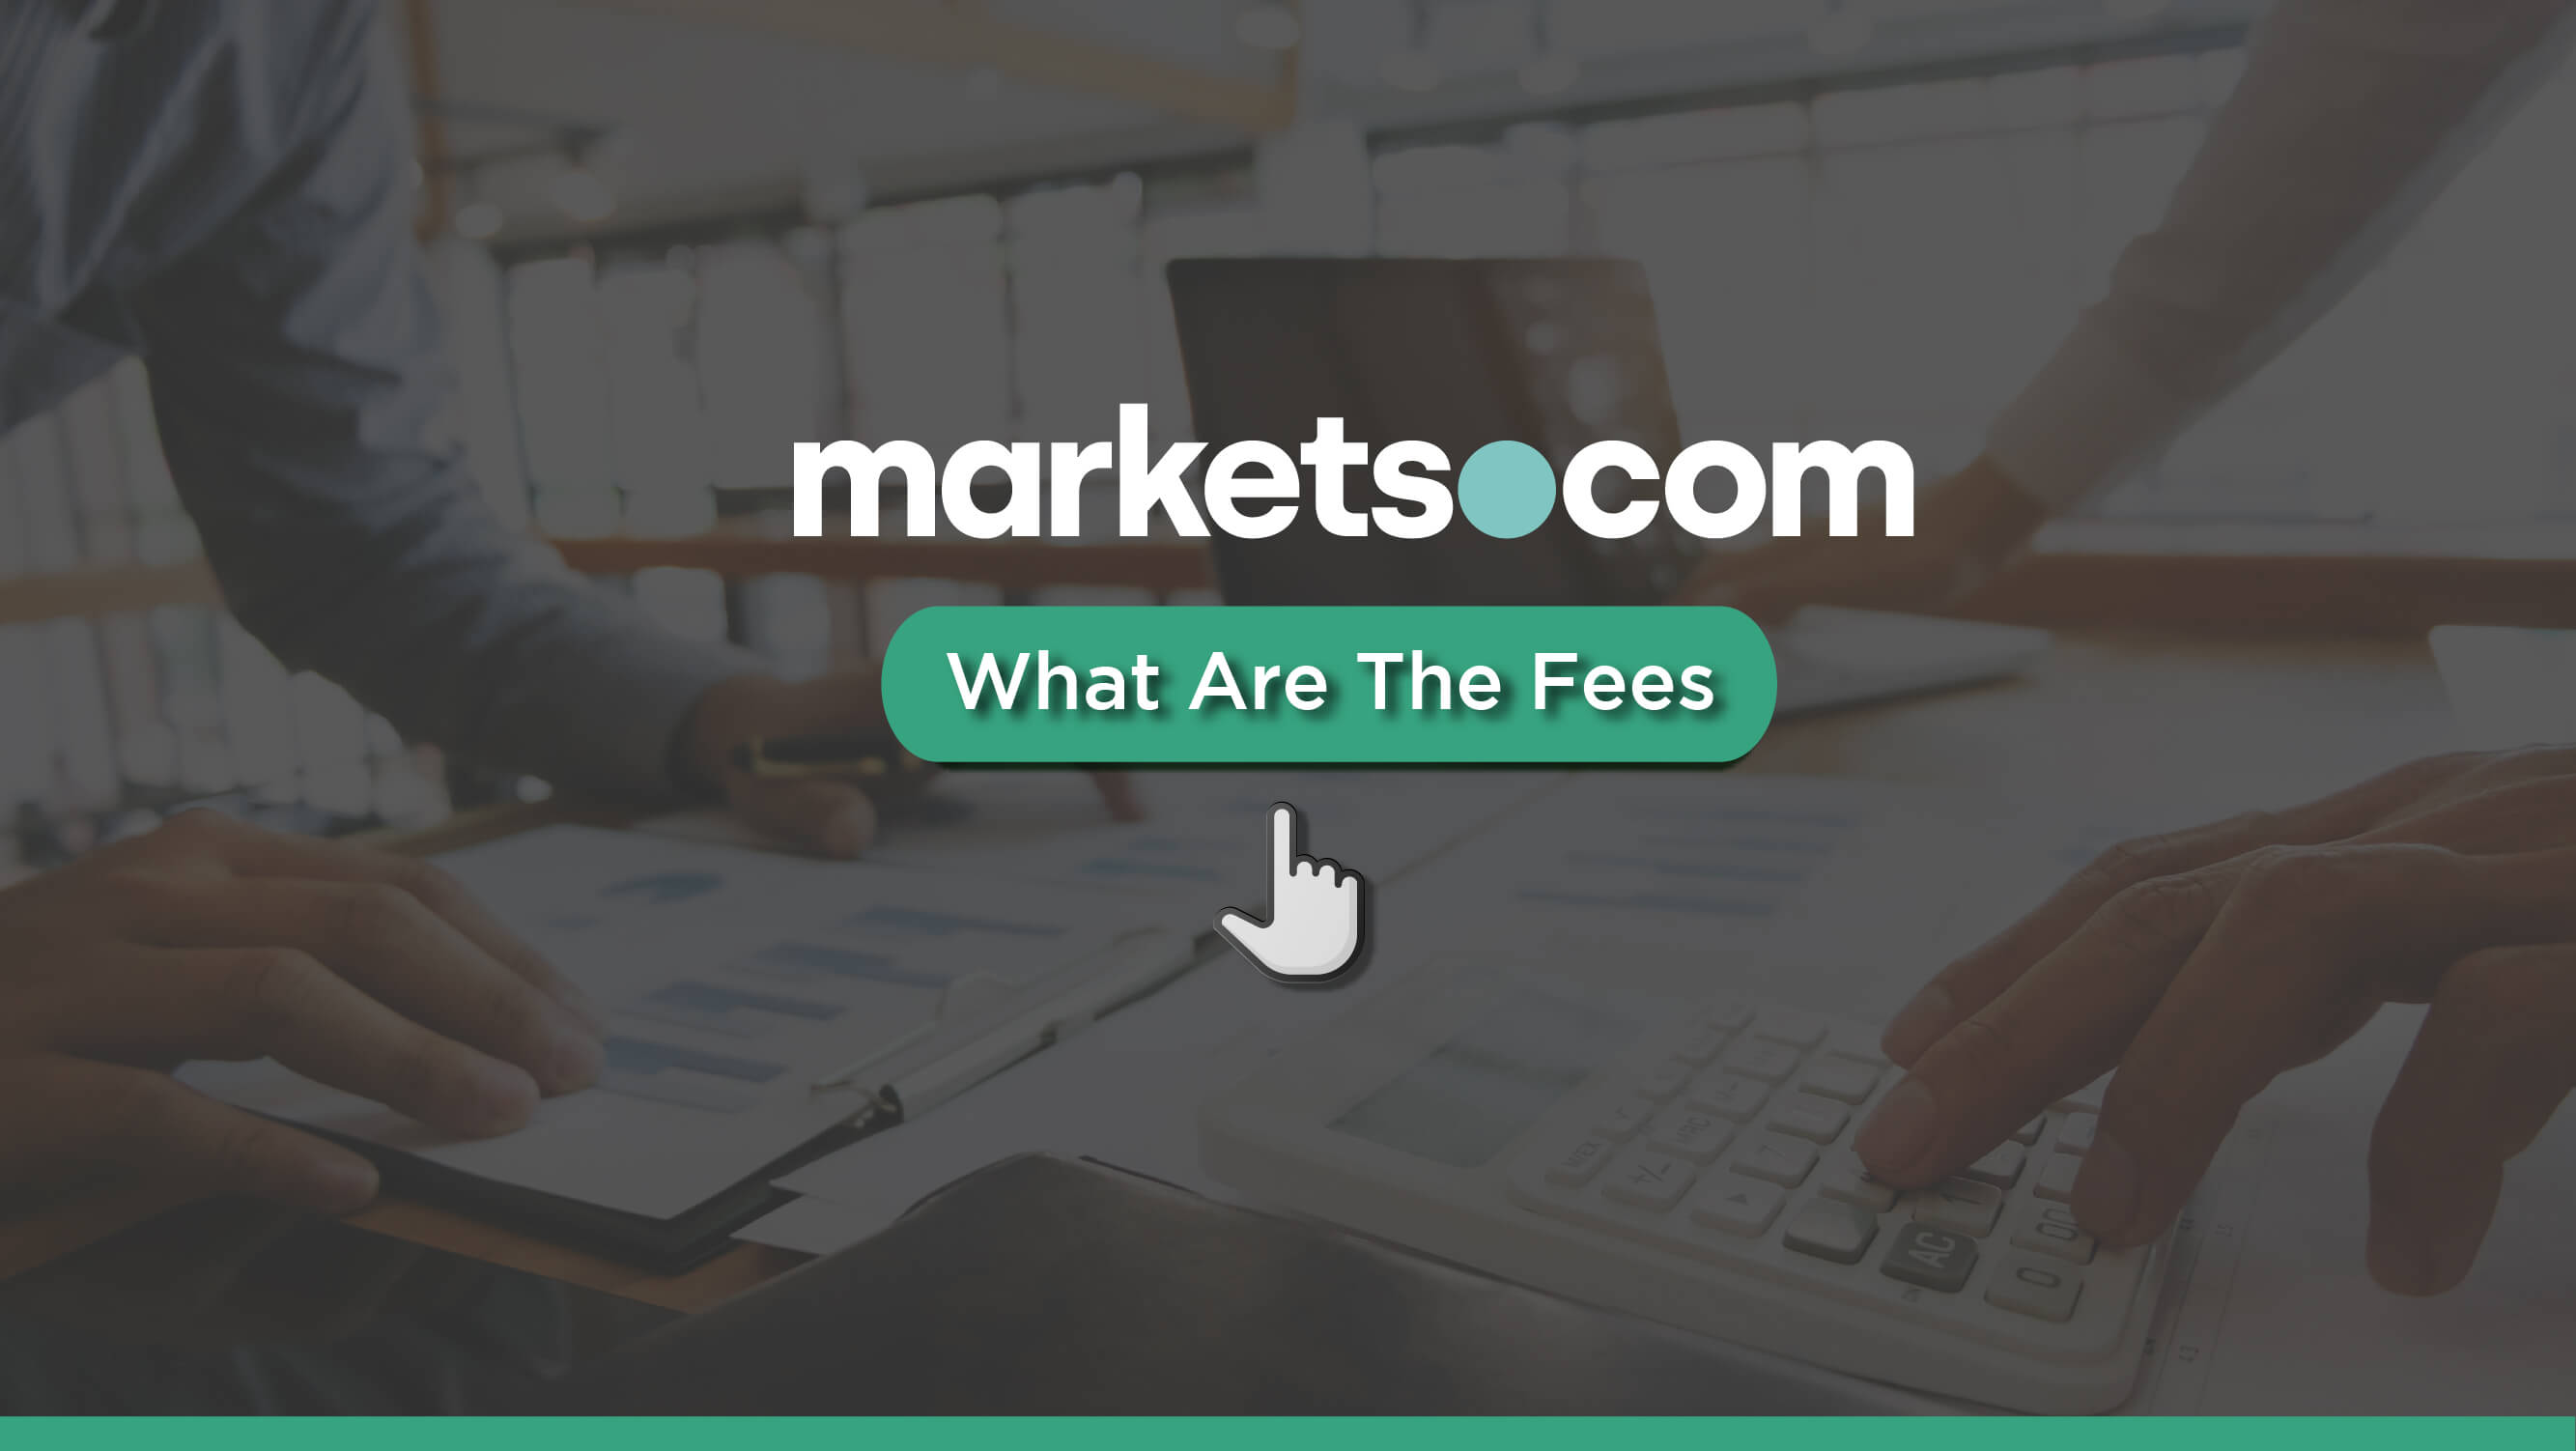 Markets.com Fees – What To Expect